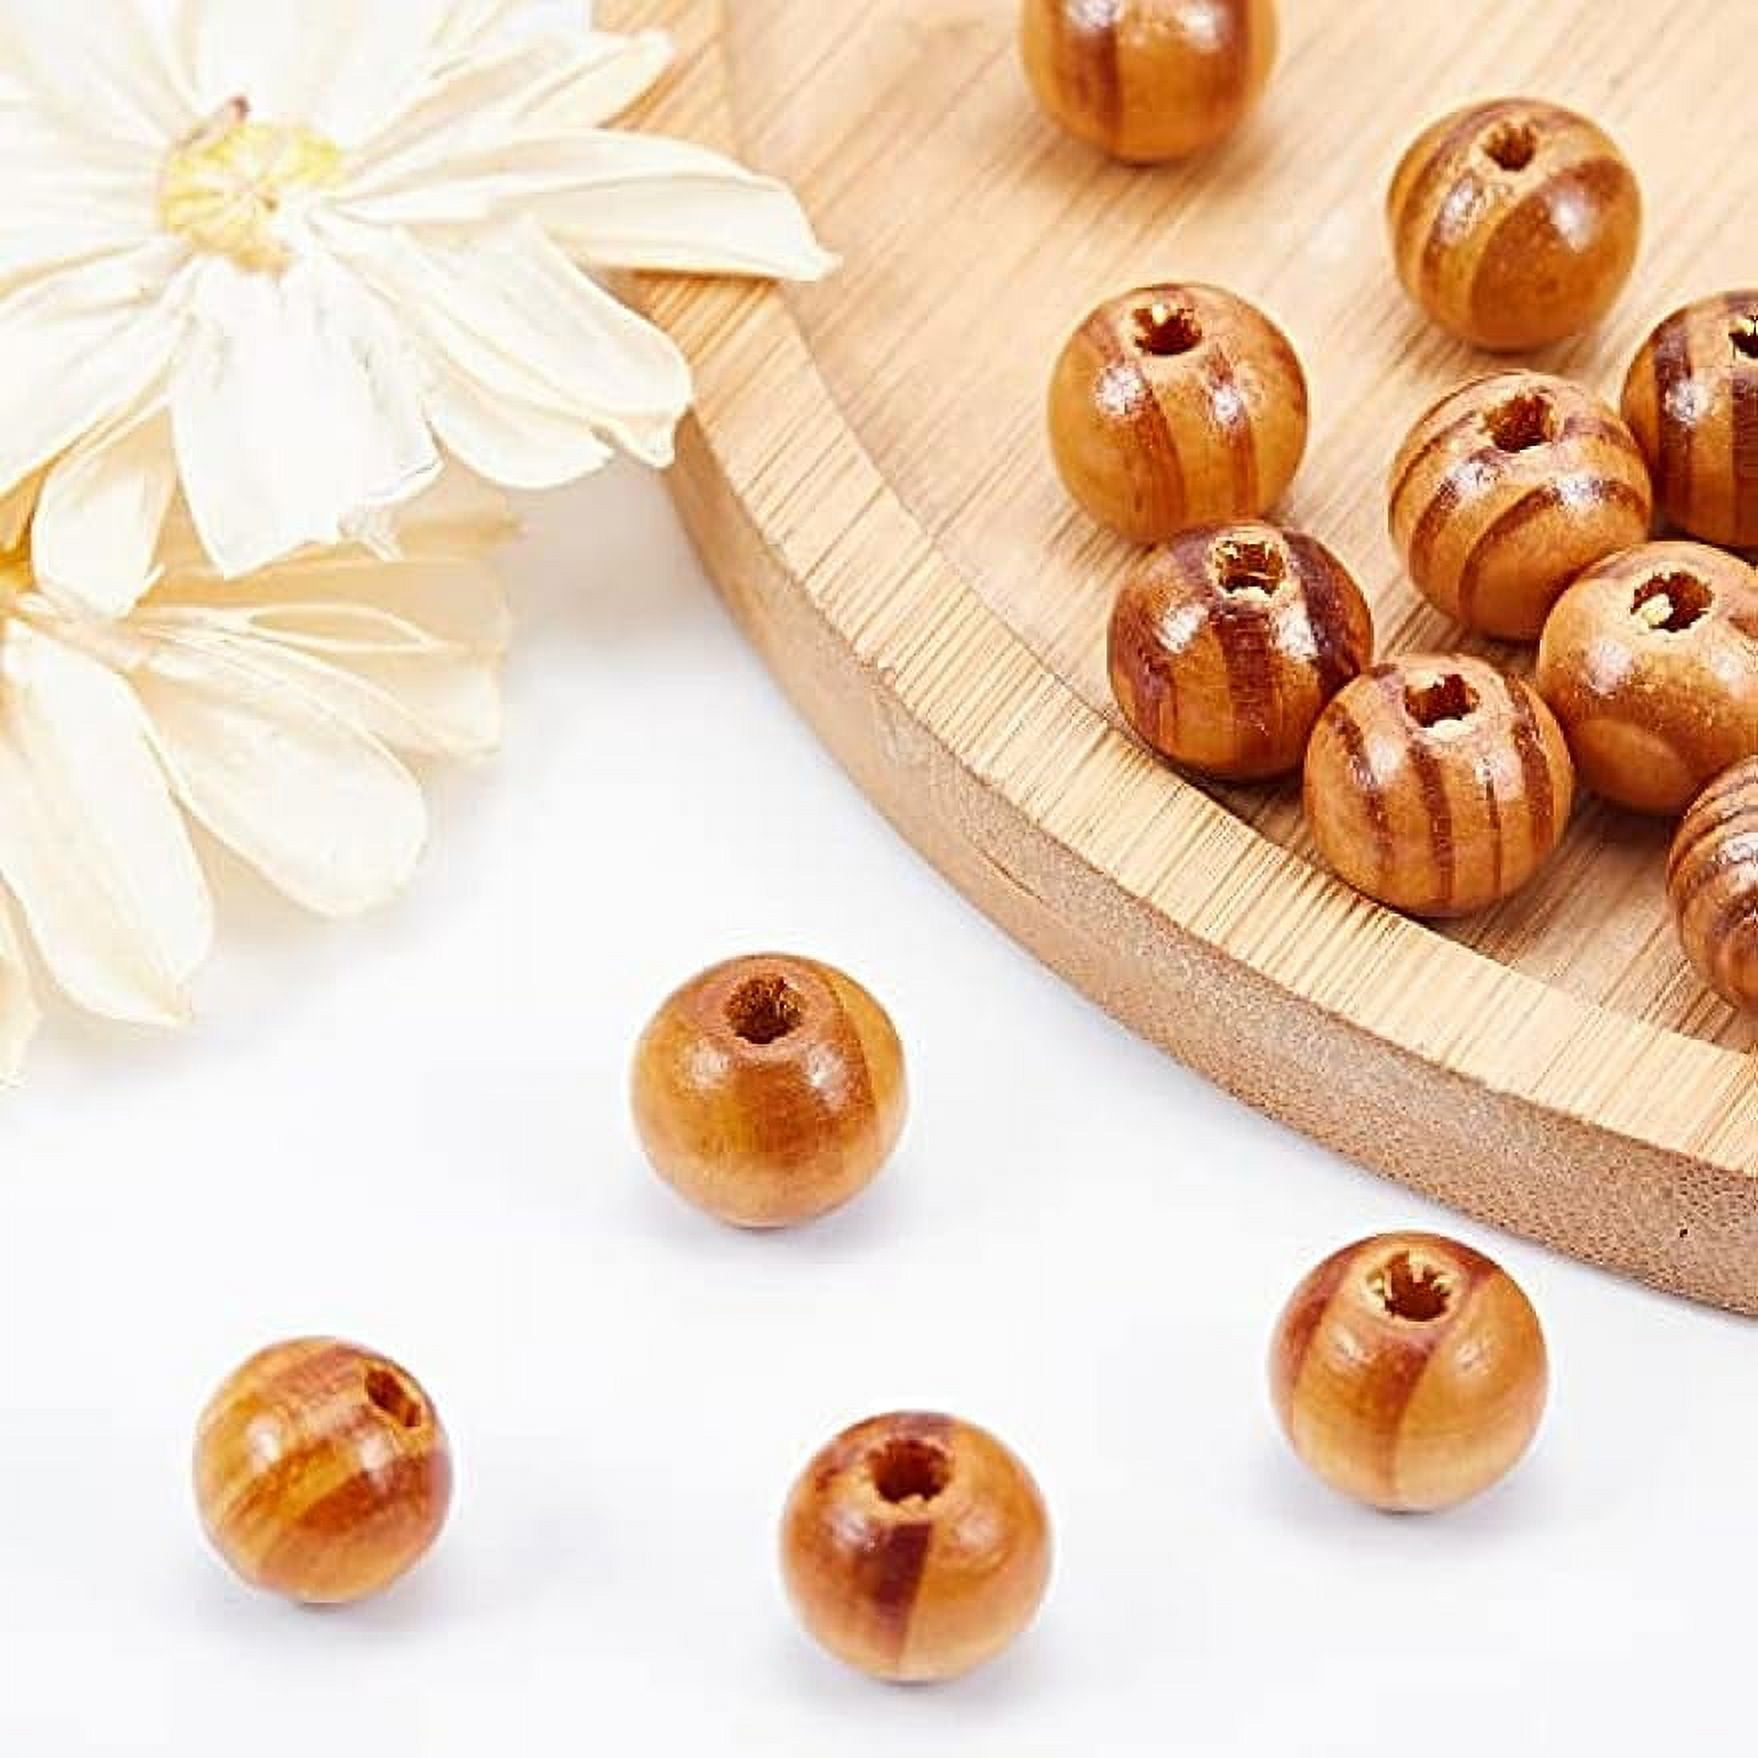 COHEALI 200 Pcs Decor Hole Beads Wood Beads Bulk Beads for Bracelets Wood  Beads for Crafts Spacer Beads for Jewelry Making Craft Beads Scattered  Beads